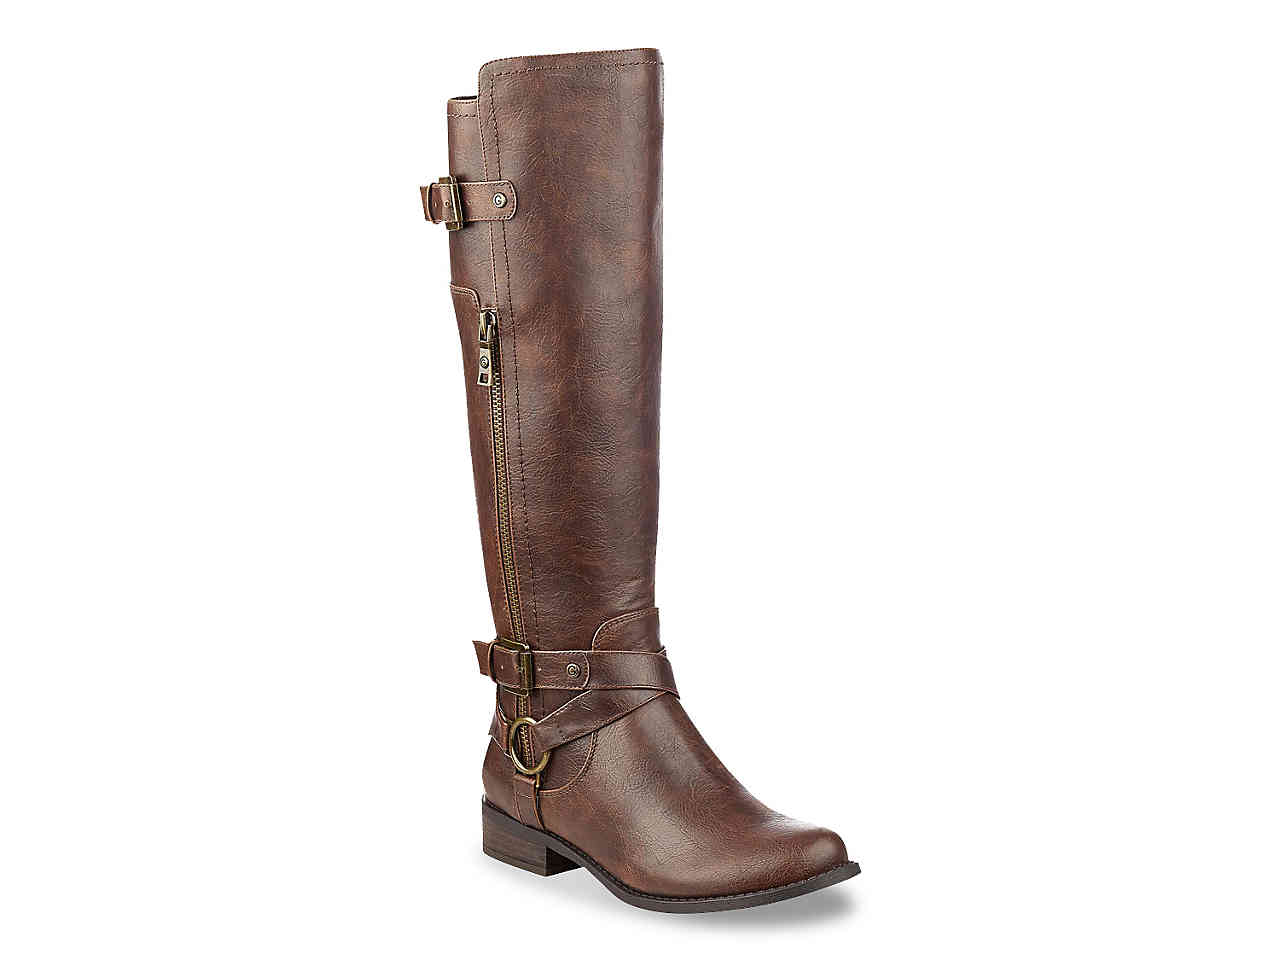 riding boots herly wide calf riding boot iairobx